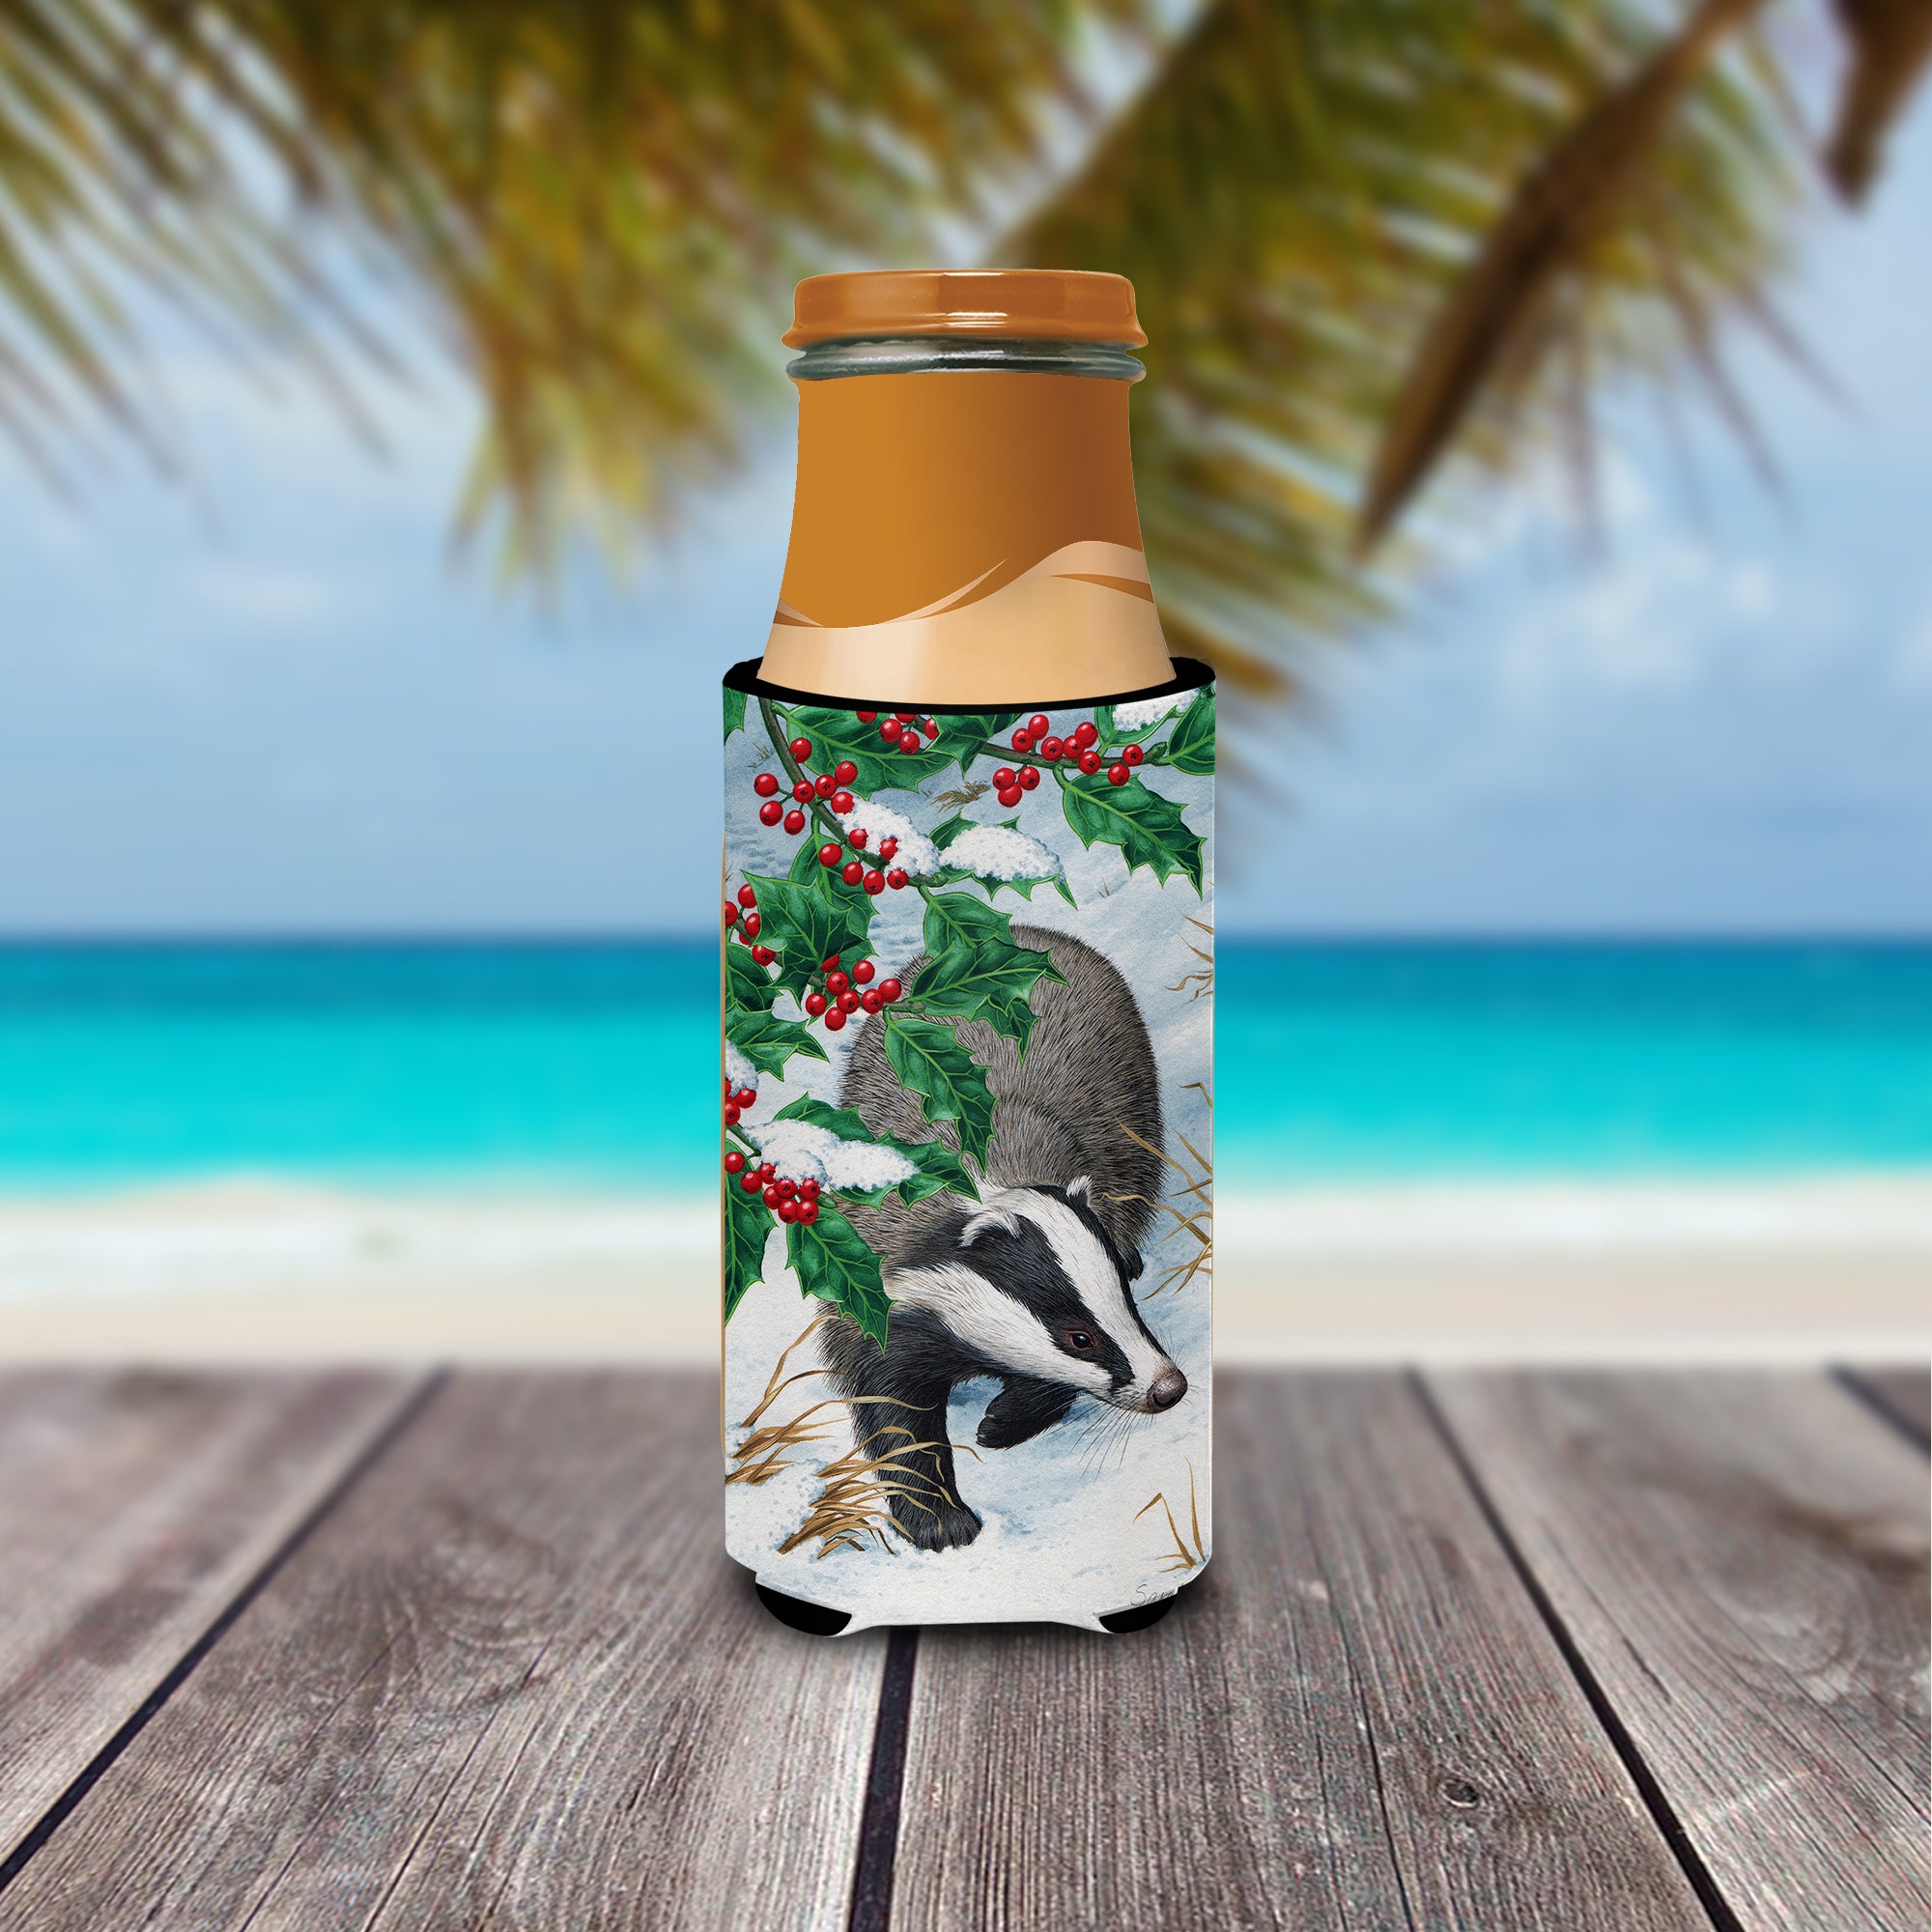 Badgers with Holly Berries Ultra Beverage Insulators for slim cans ASA2039MUK  the-store.com.